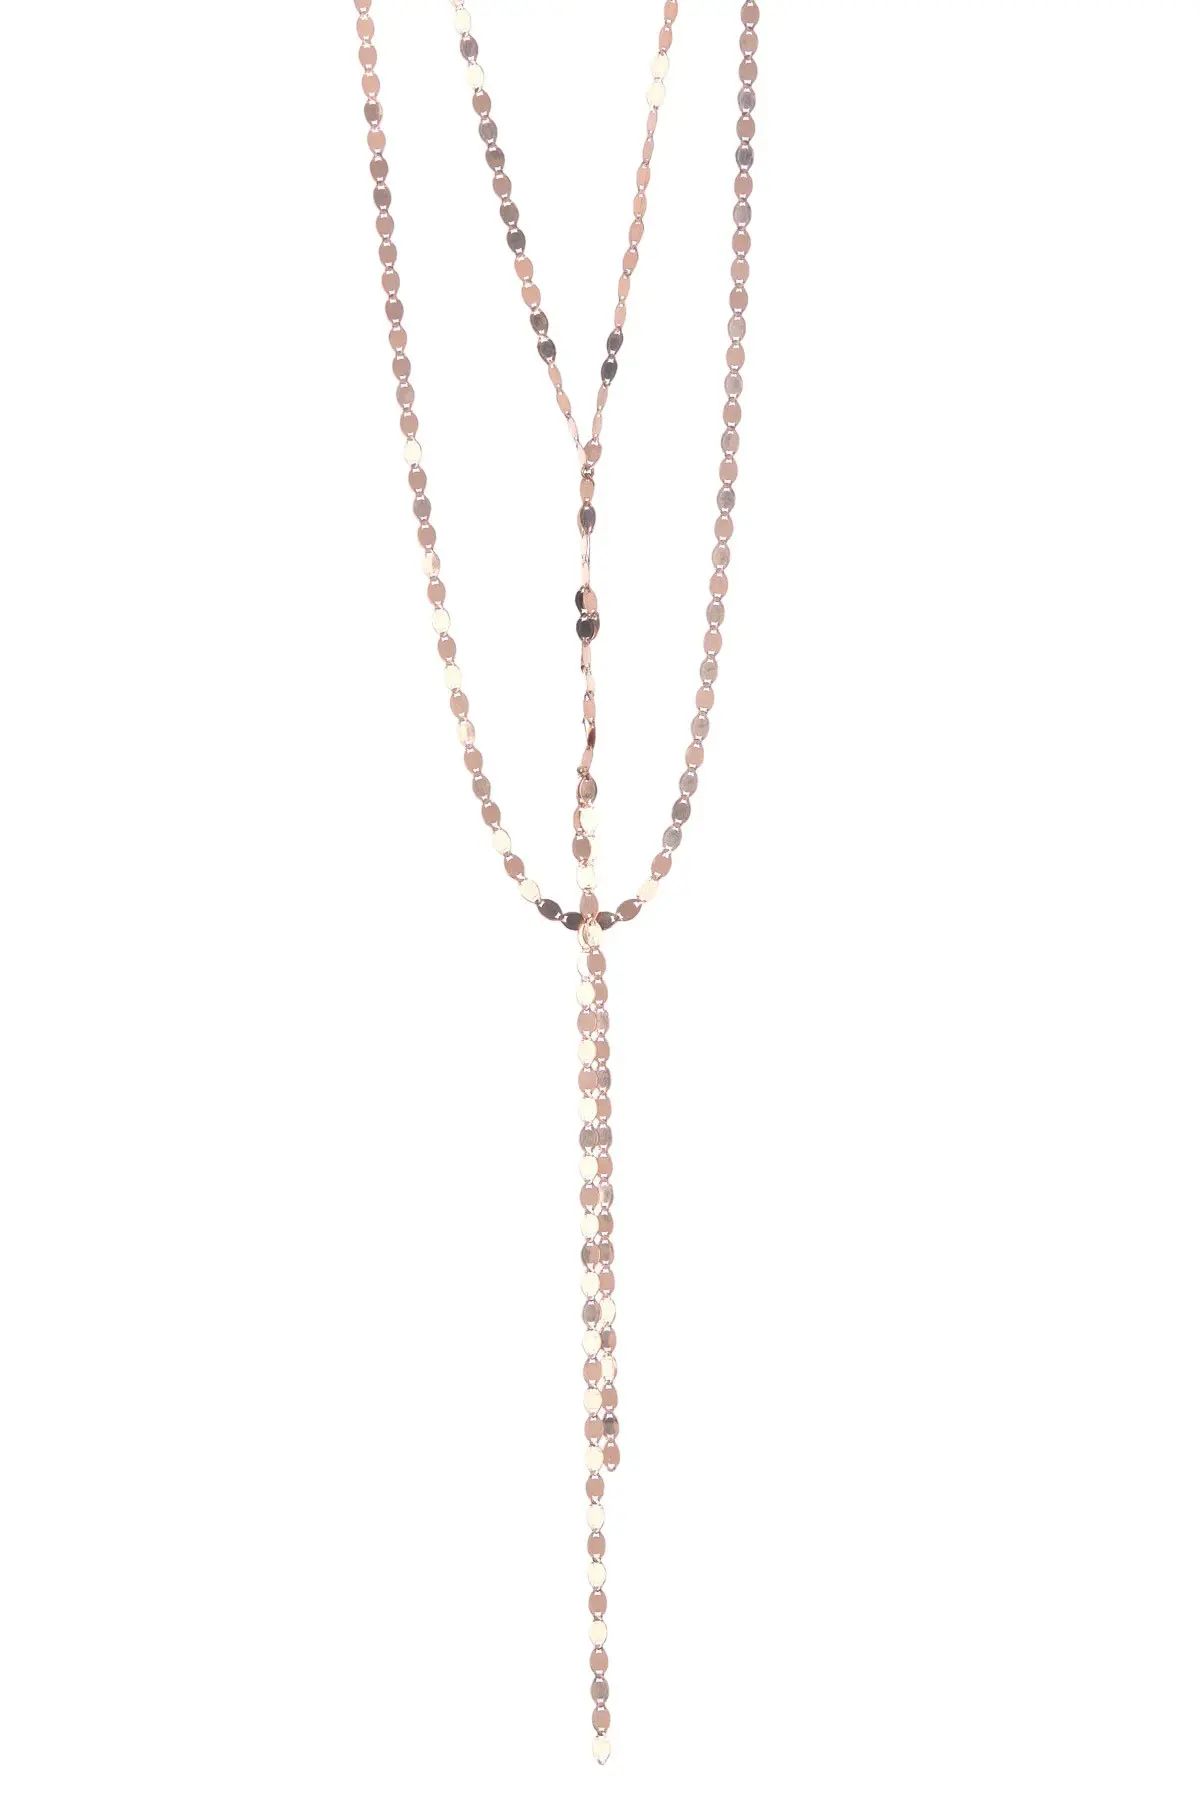 Lana Jewelry Long Nude Blake Layered Necklace at Nordstrom Rack | Nordstrom Rack